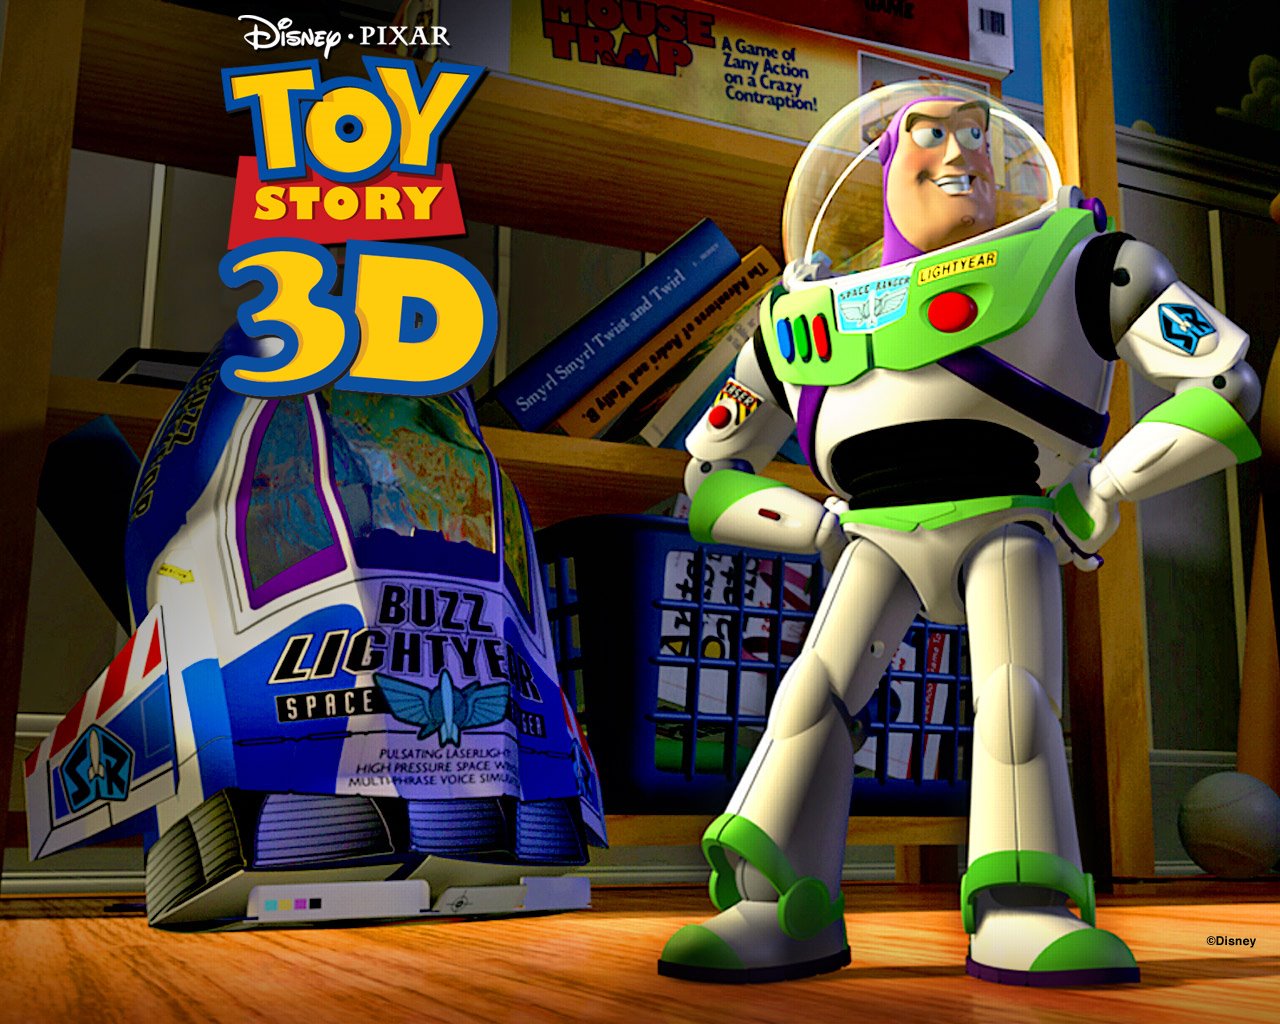 Free Wallpapers Toy Story 3 | Photo Gallery, Picture Gallery | Toy Story 3 